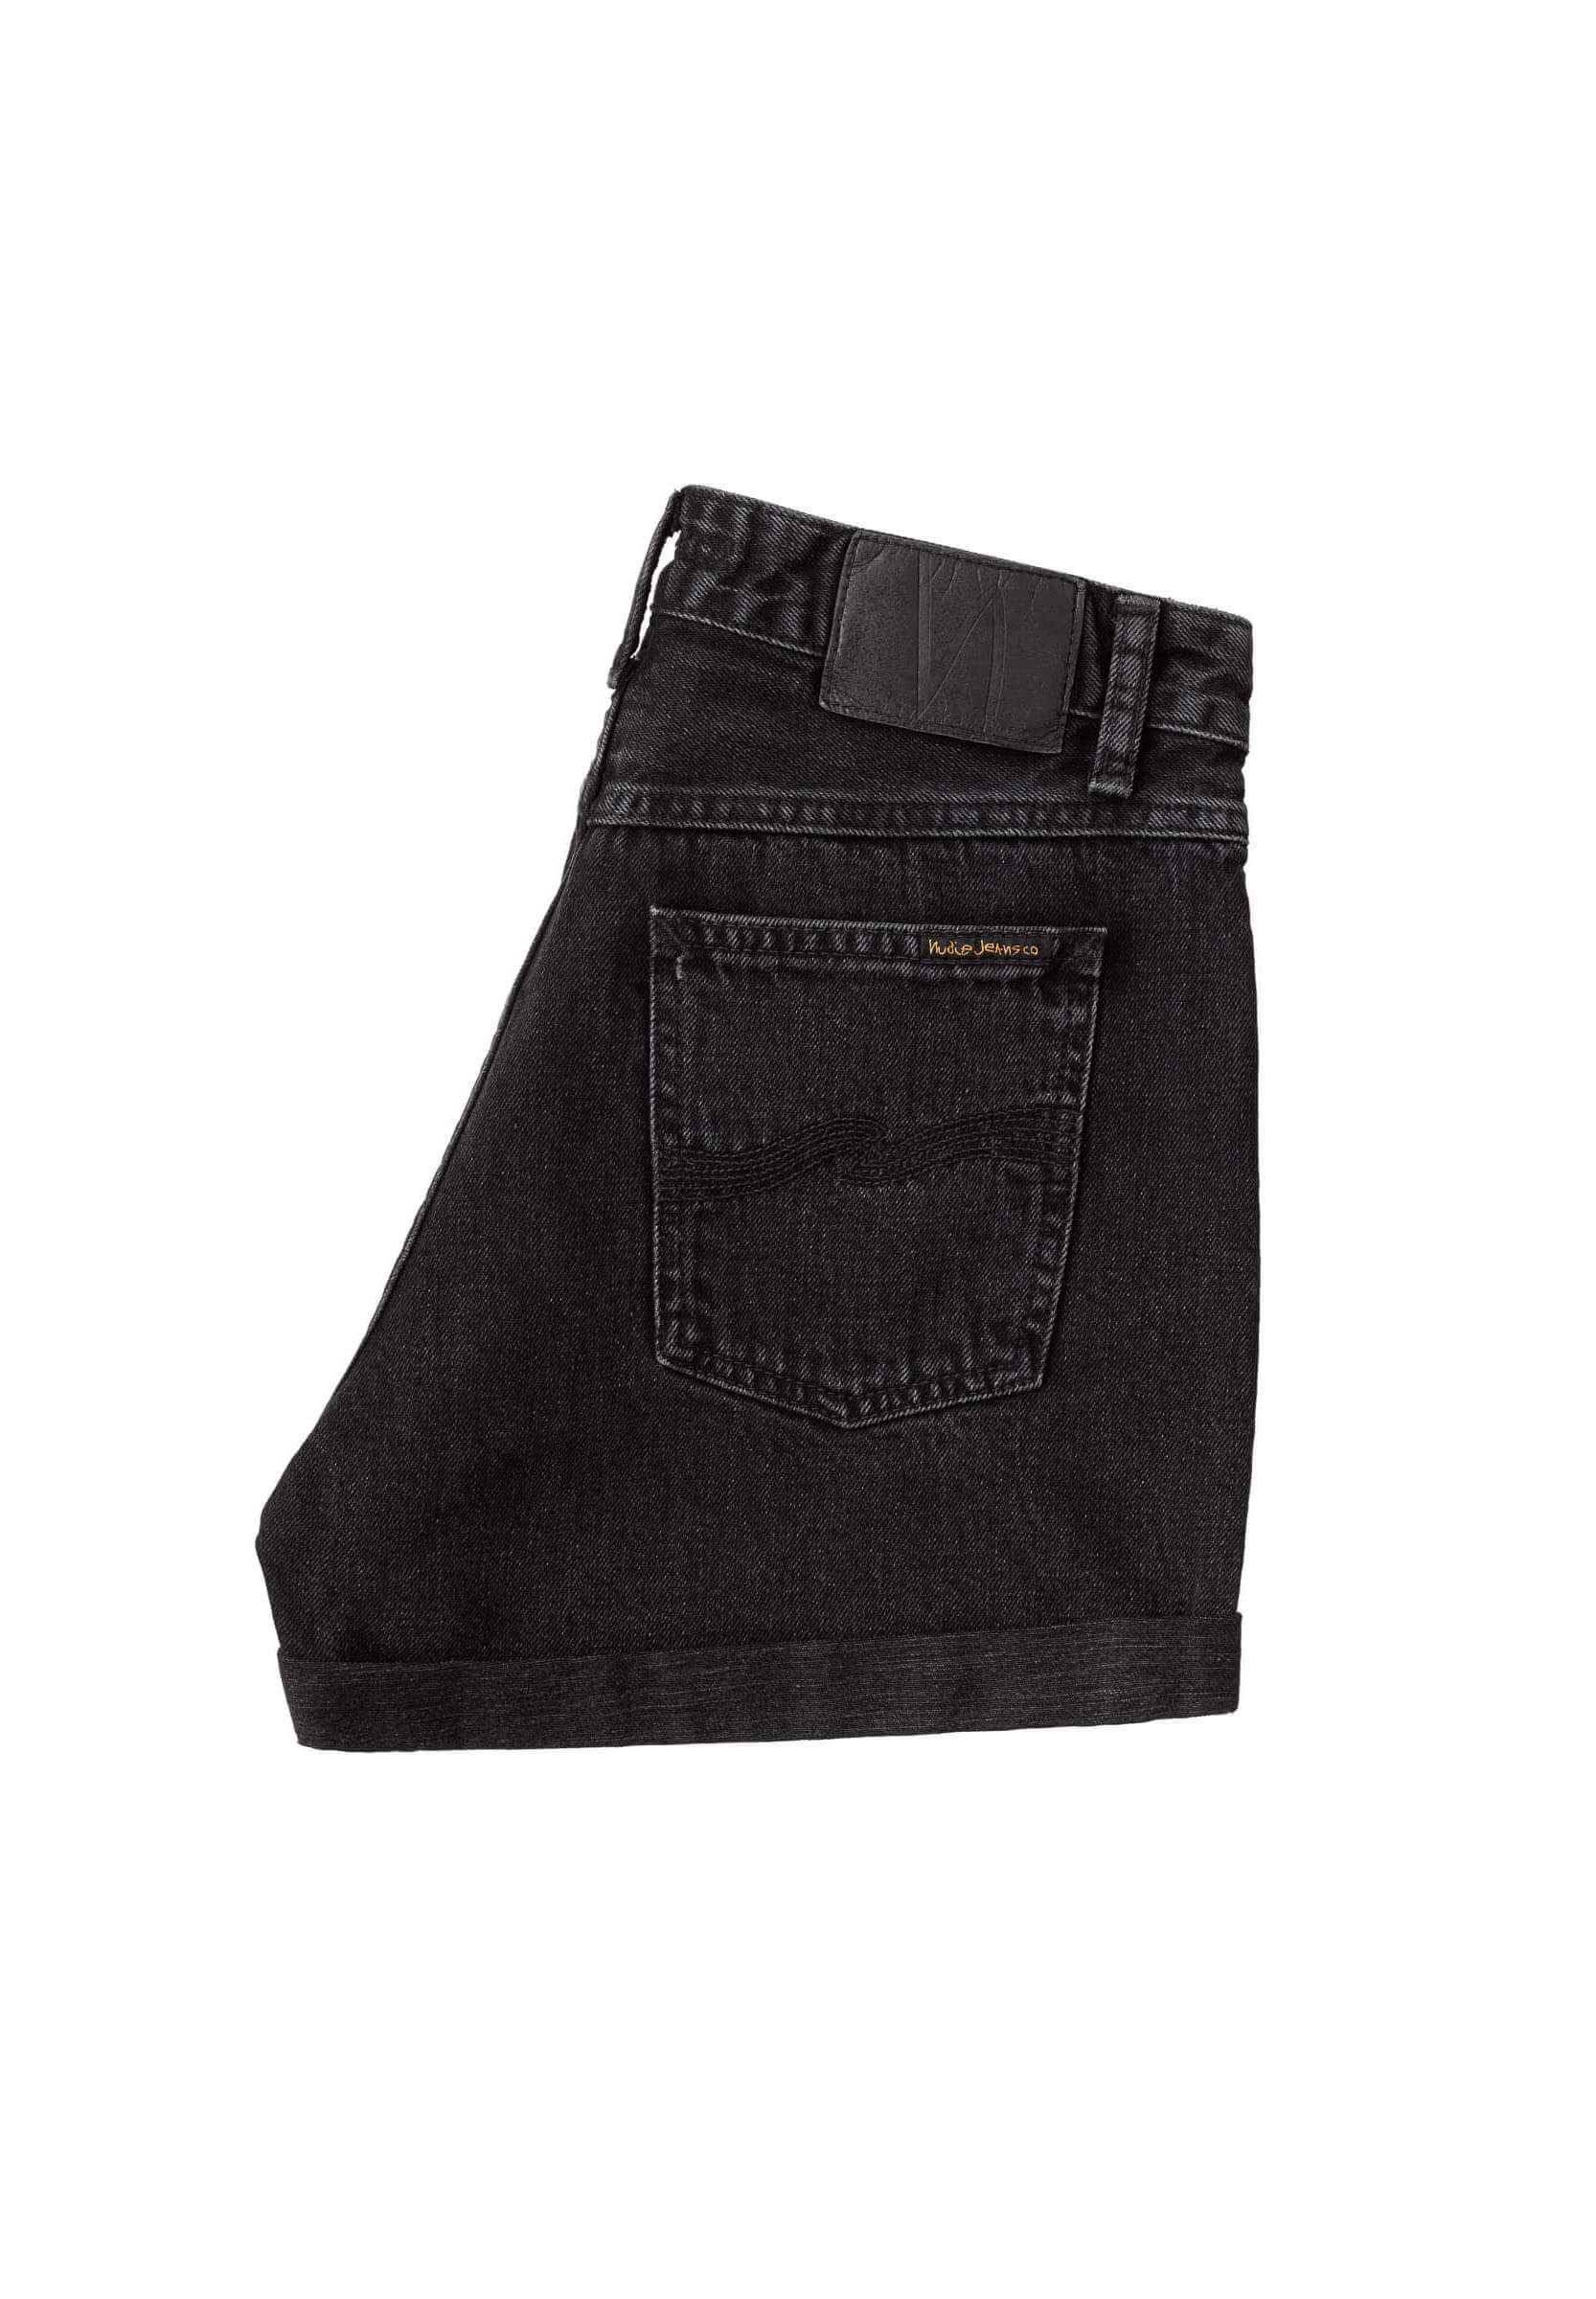 NUDIE JEANS Shorts black trace 26